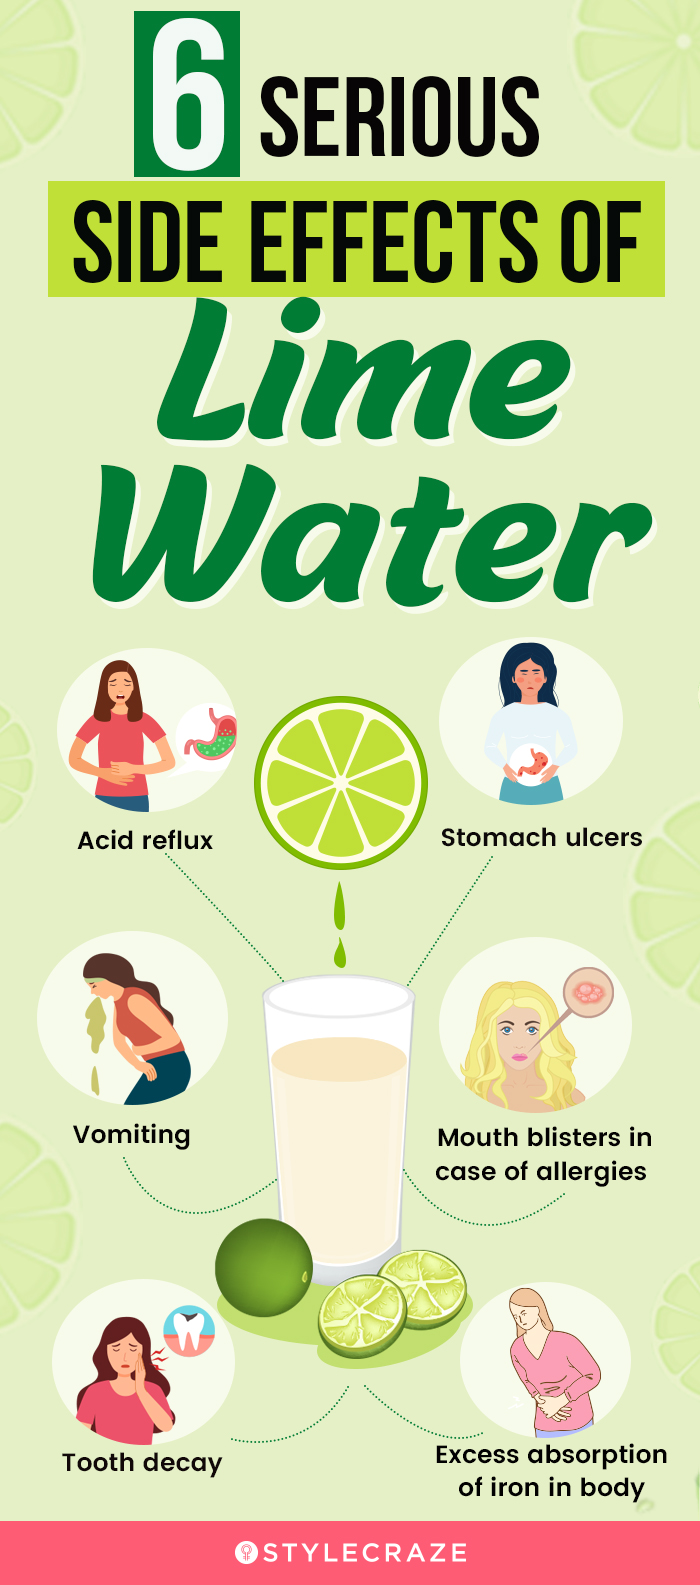 6 serious side effects of limewater (infographic)